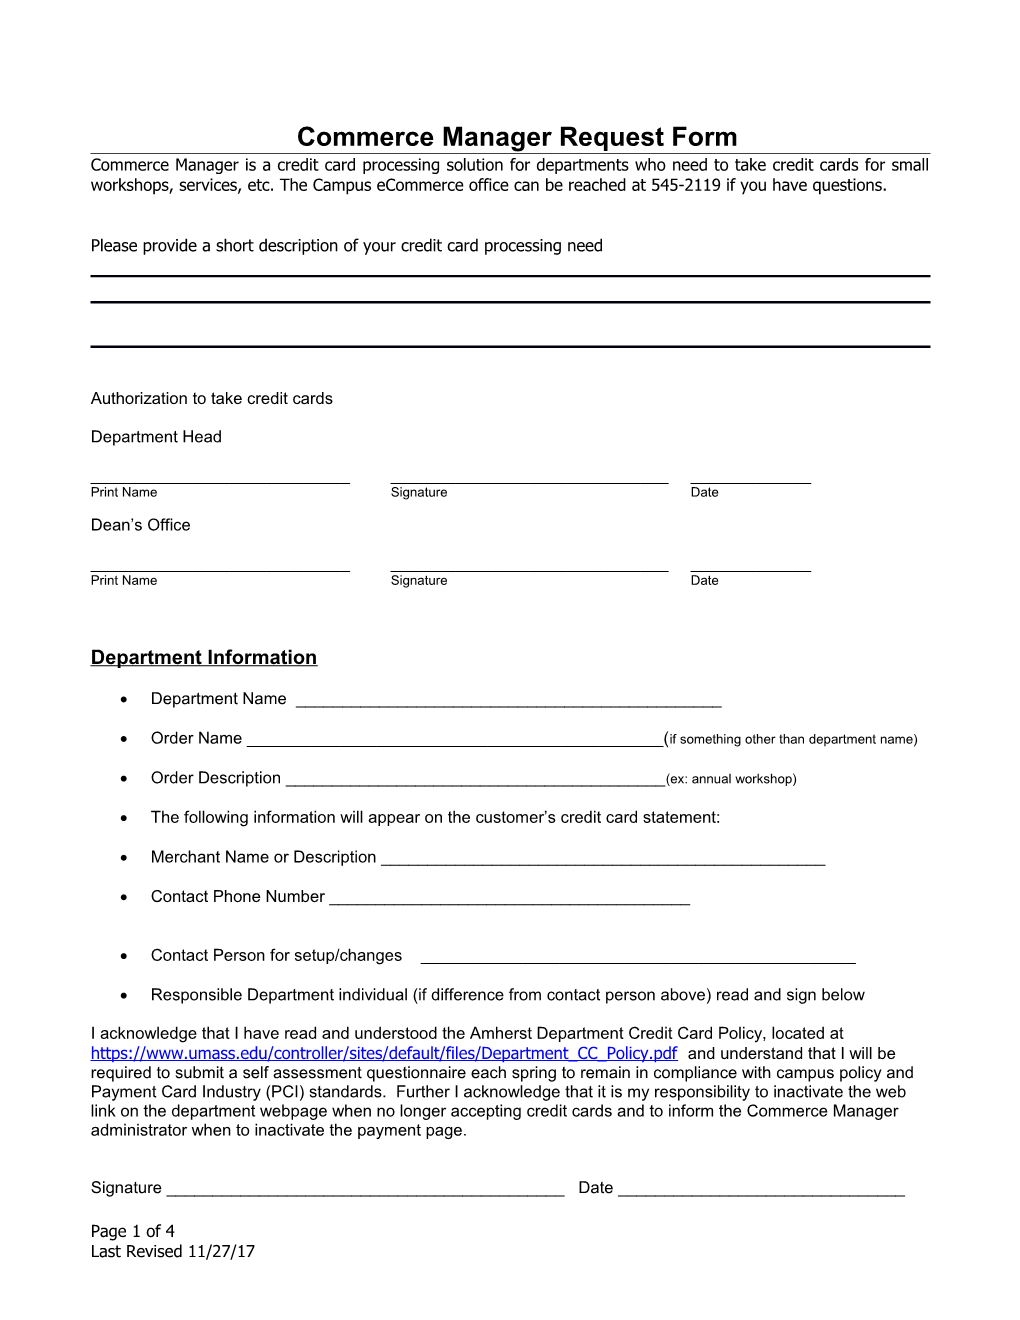 Commerce Manager Request Form